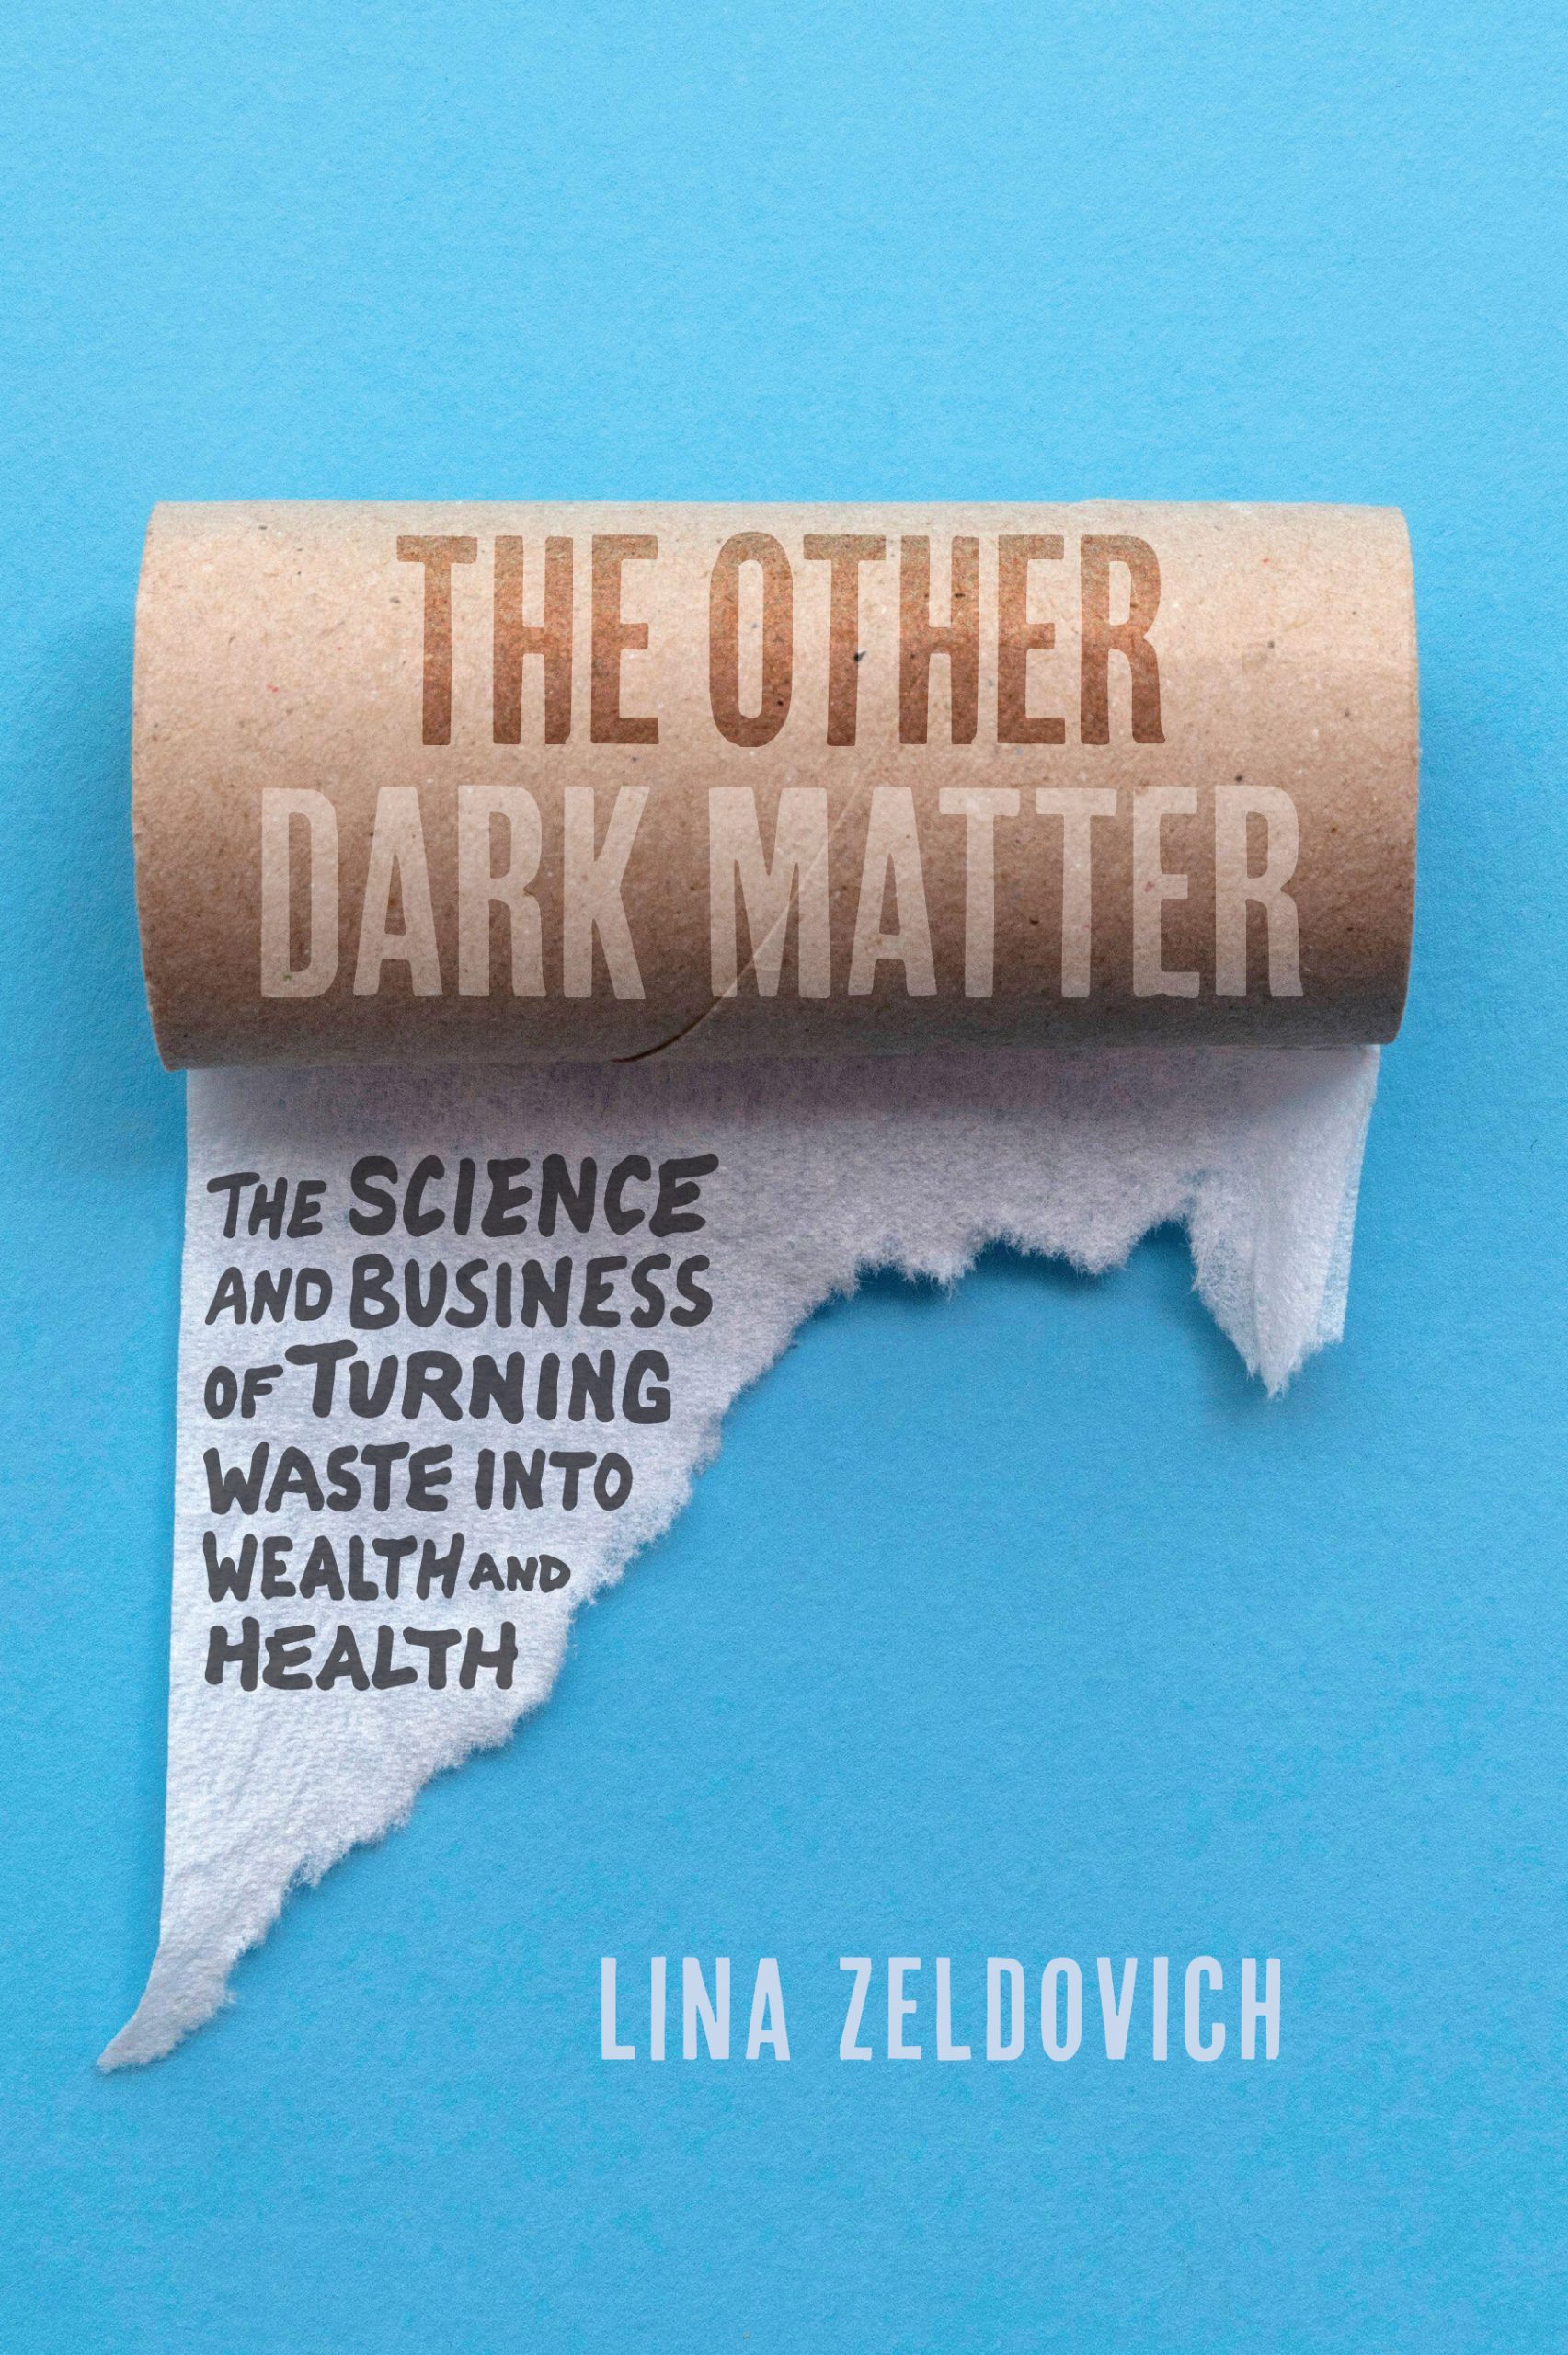 Diving Into “The Other Dark Matter,” a guest post from Lina Zeldovich